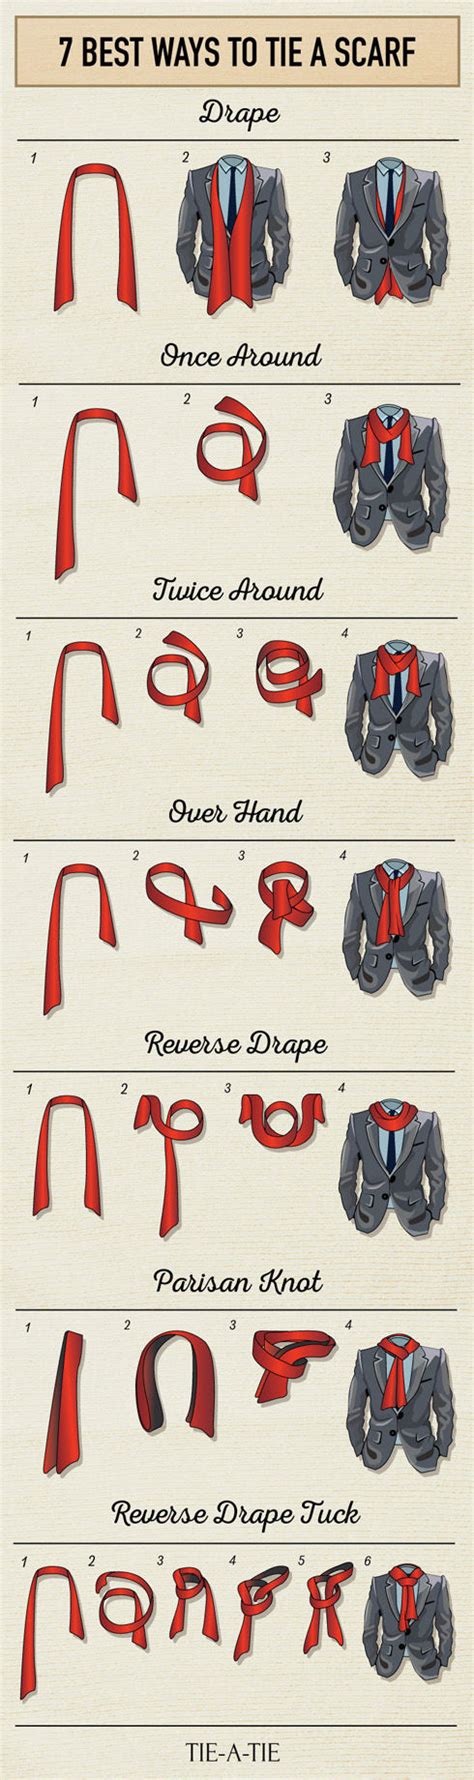 7 Best Ways To Tie A Scarf Pictures Photos And Images